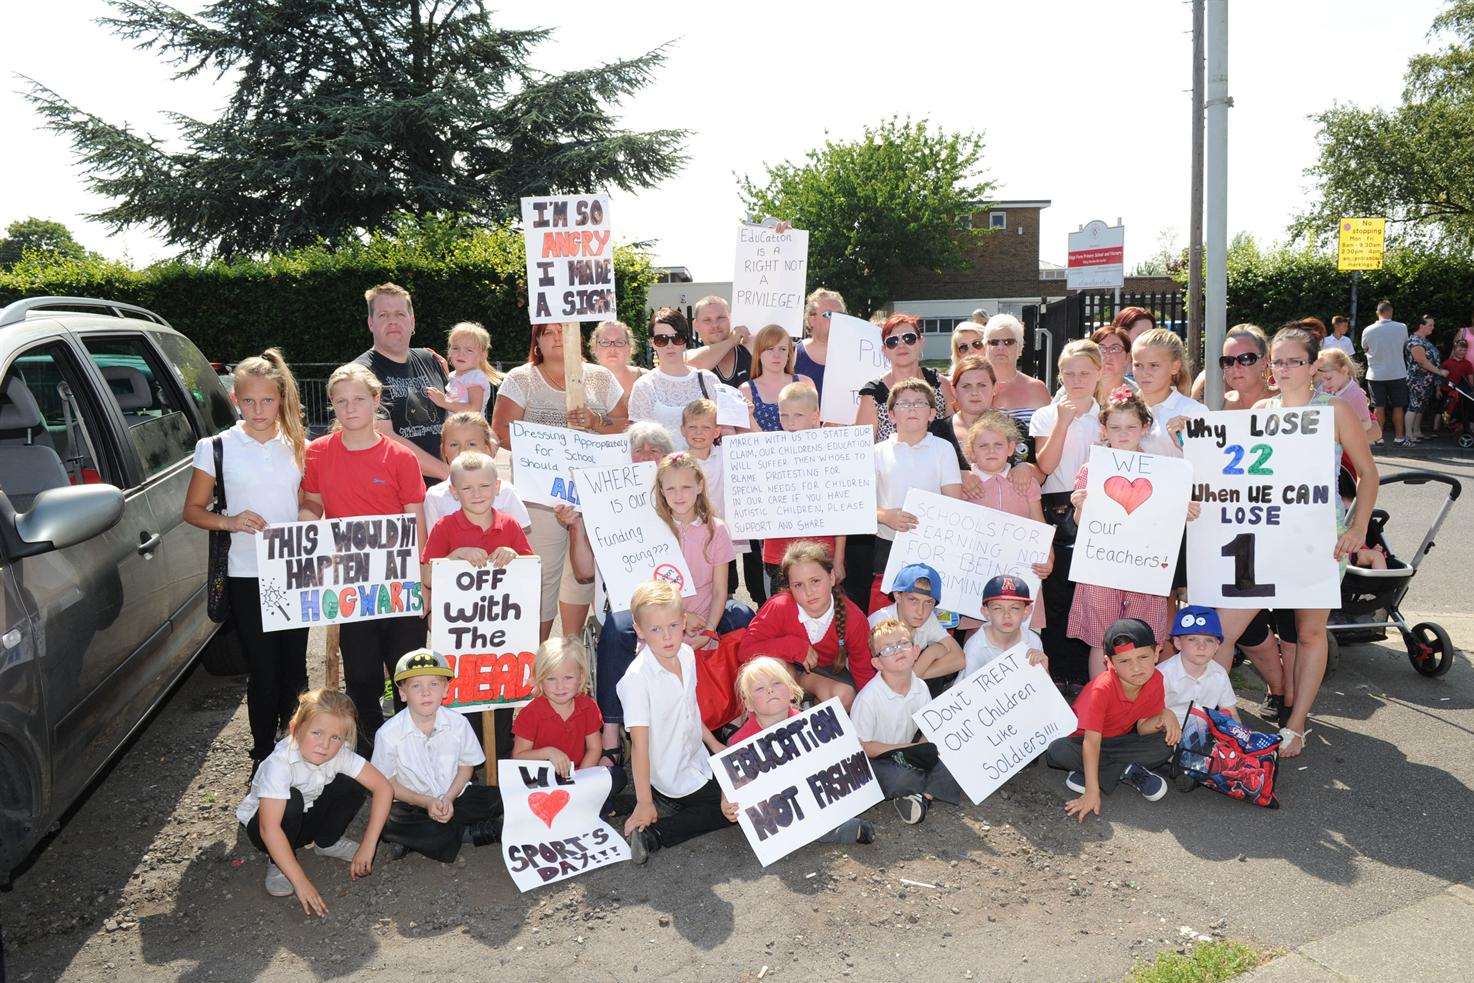 Parents protested against the decisions made by head teacher Jane Porter at Kings Farm Primary School